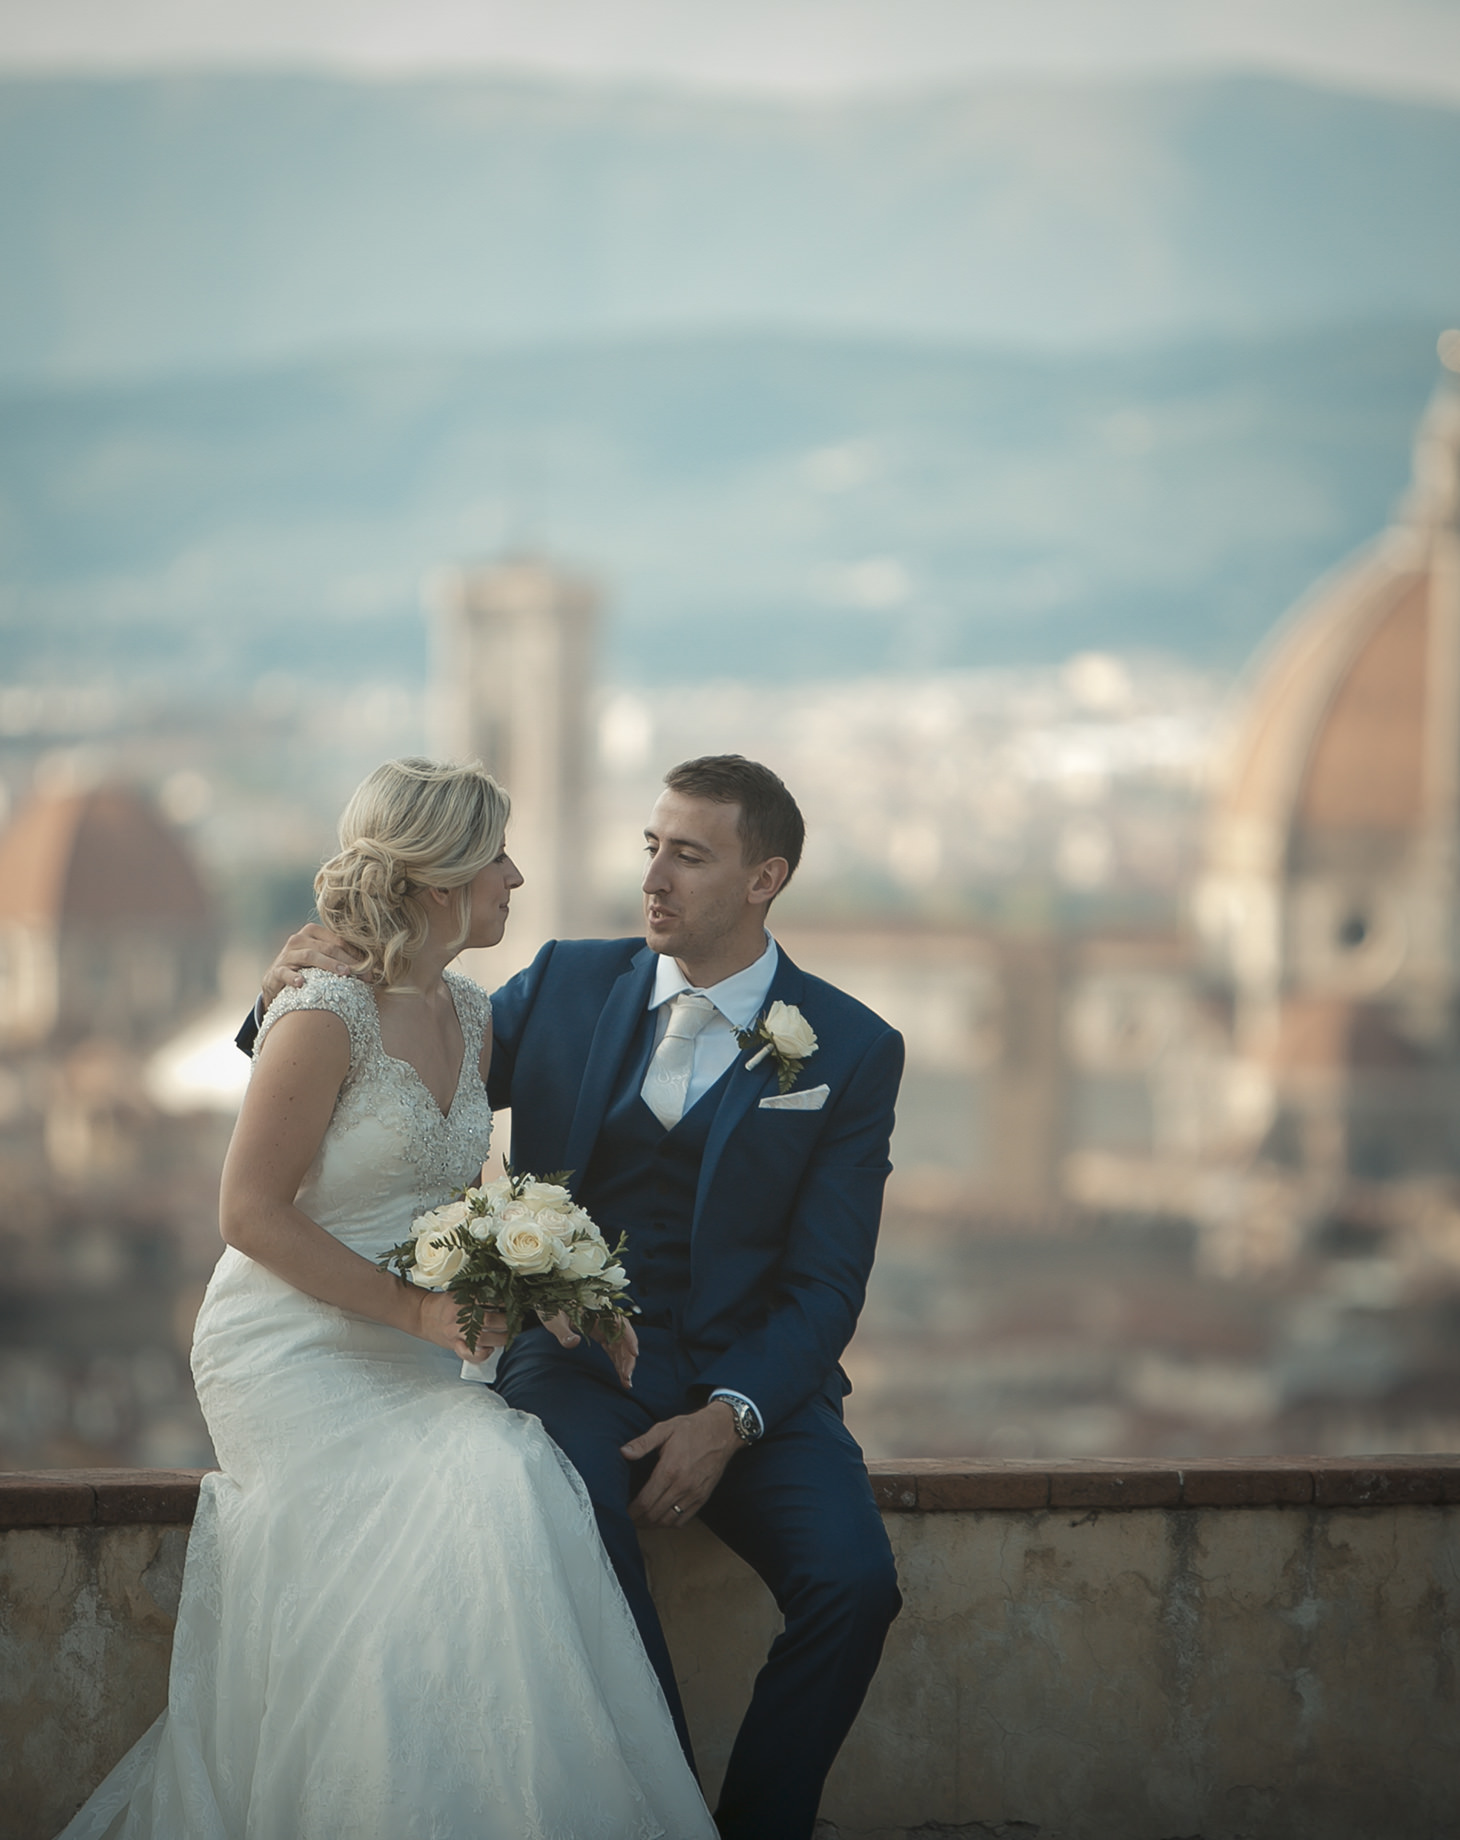 <p>Laura and William, intimate wedding in Florence</p>